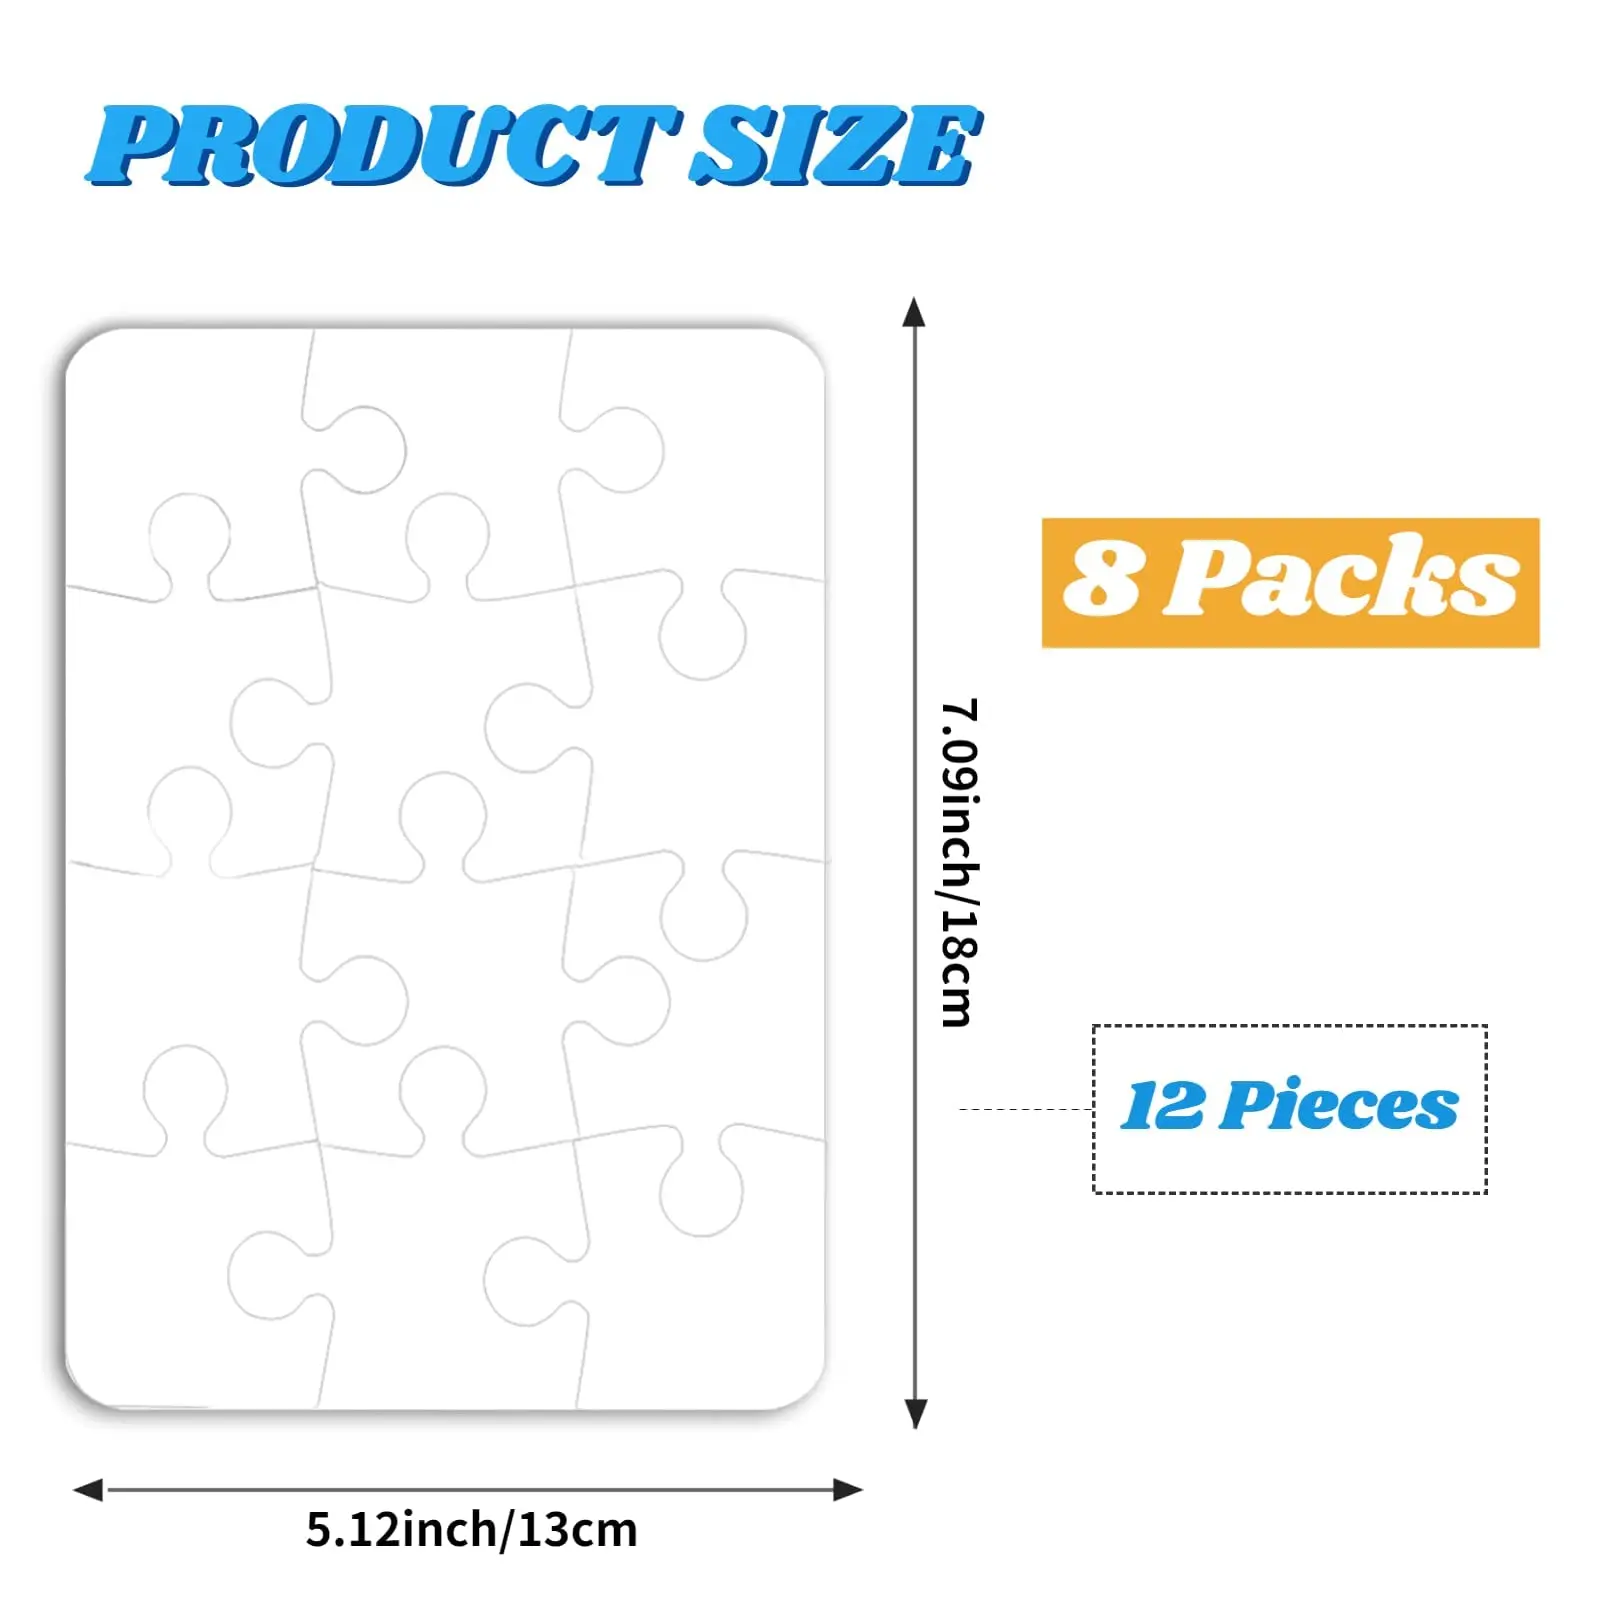 Blank Jigsaw Puzzle Set - 70 Pieces White Rectangular Puzzles for